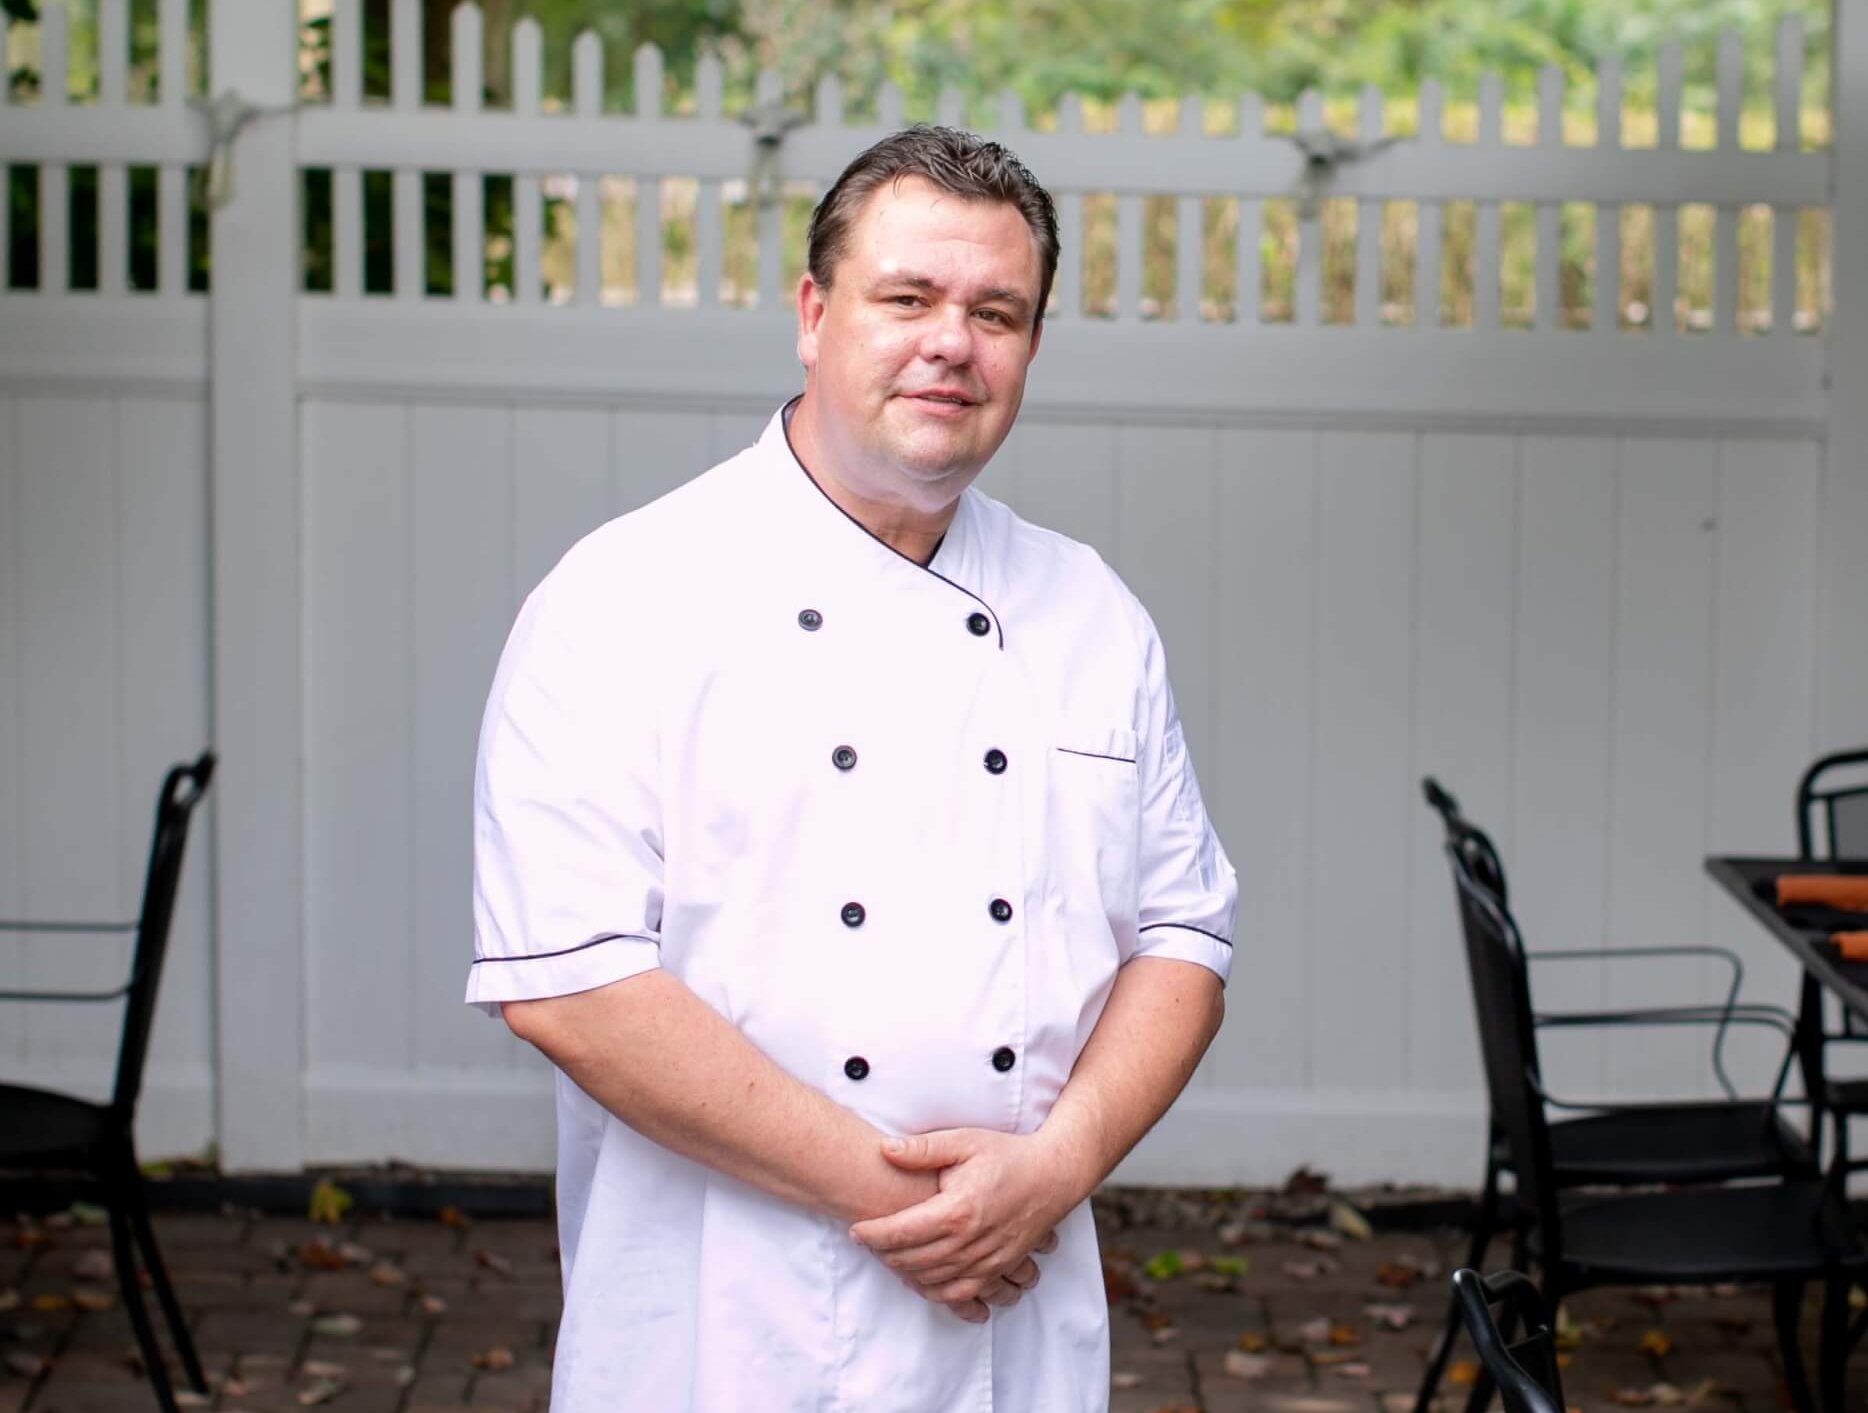 Chef Photo for web